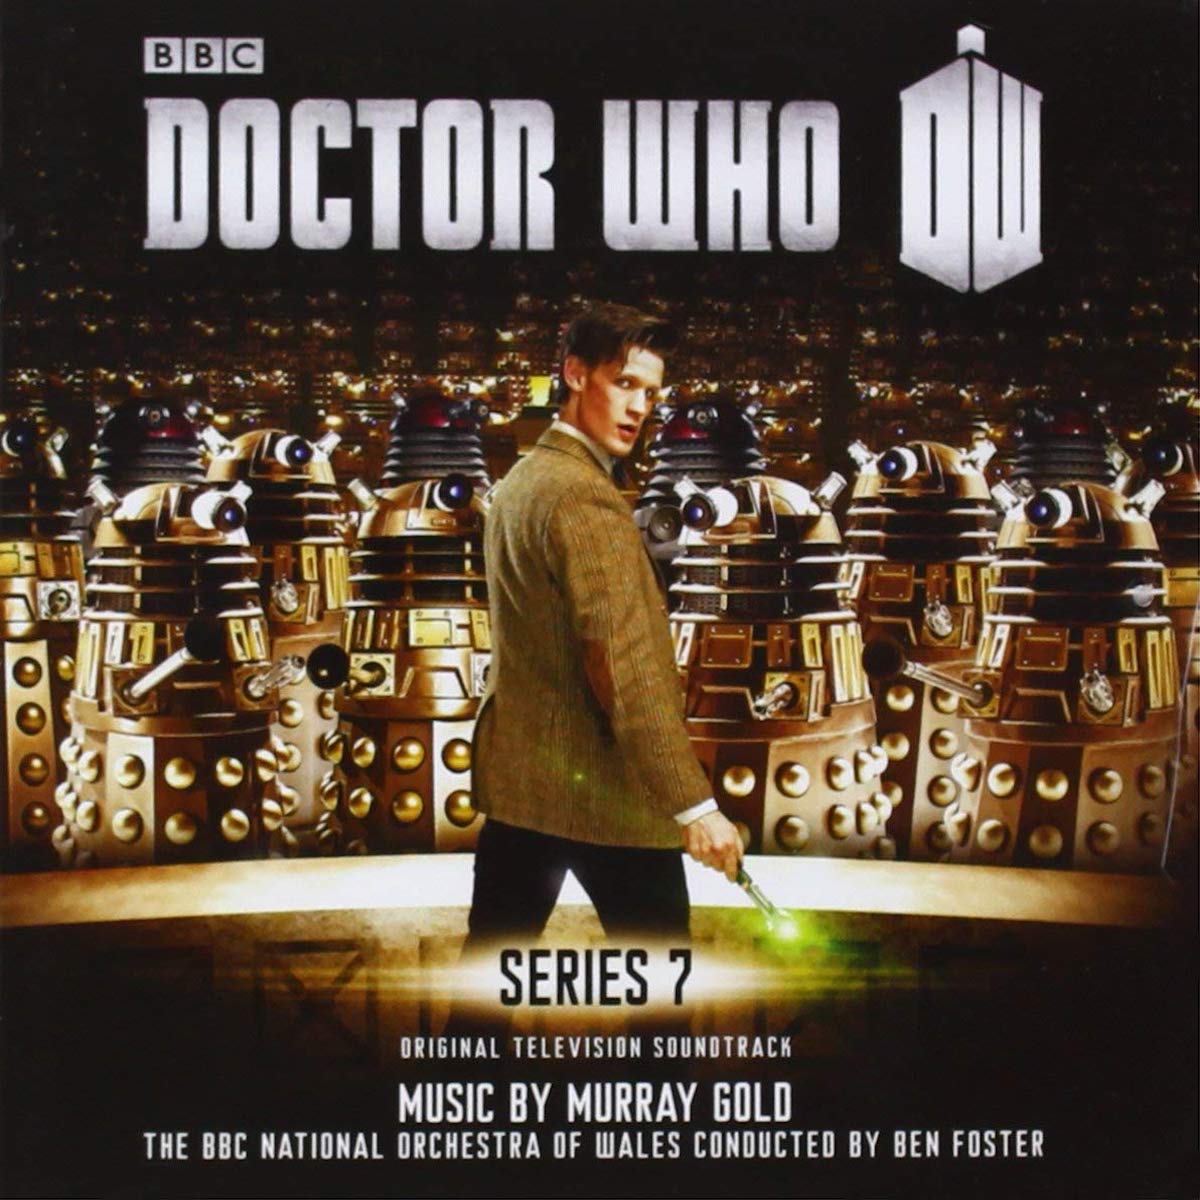 Doctor Who Series 7 Soundtrack